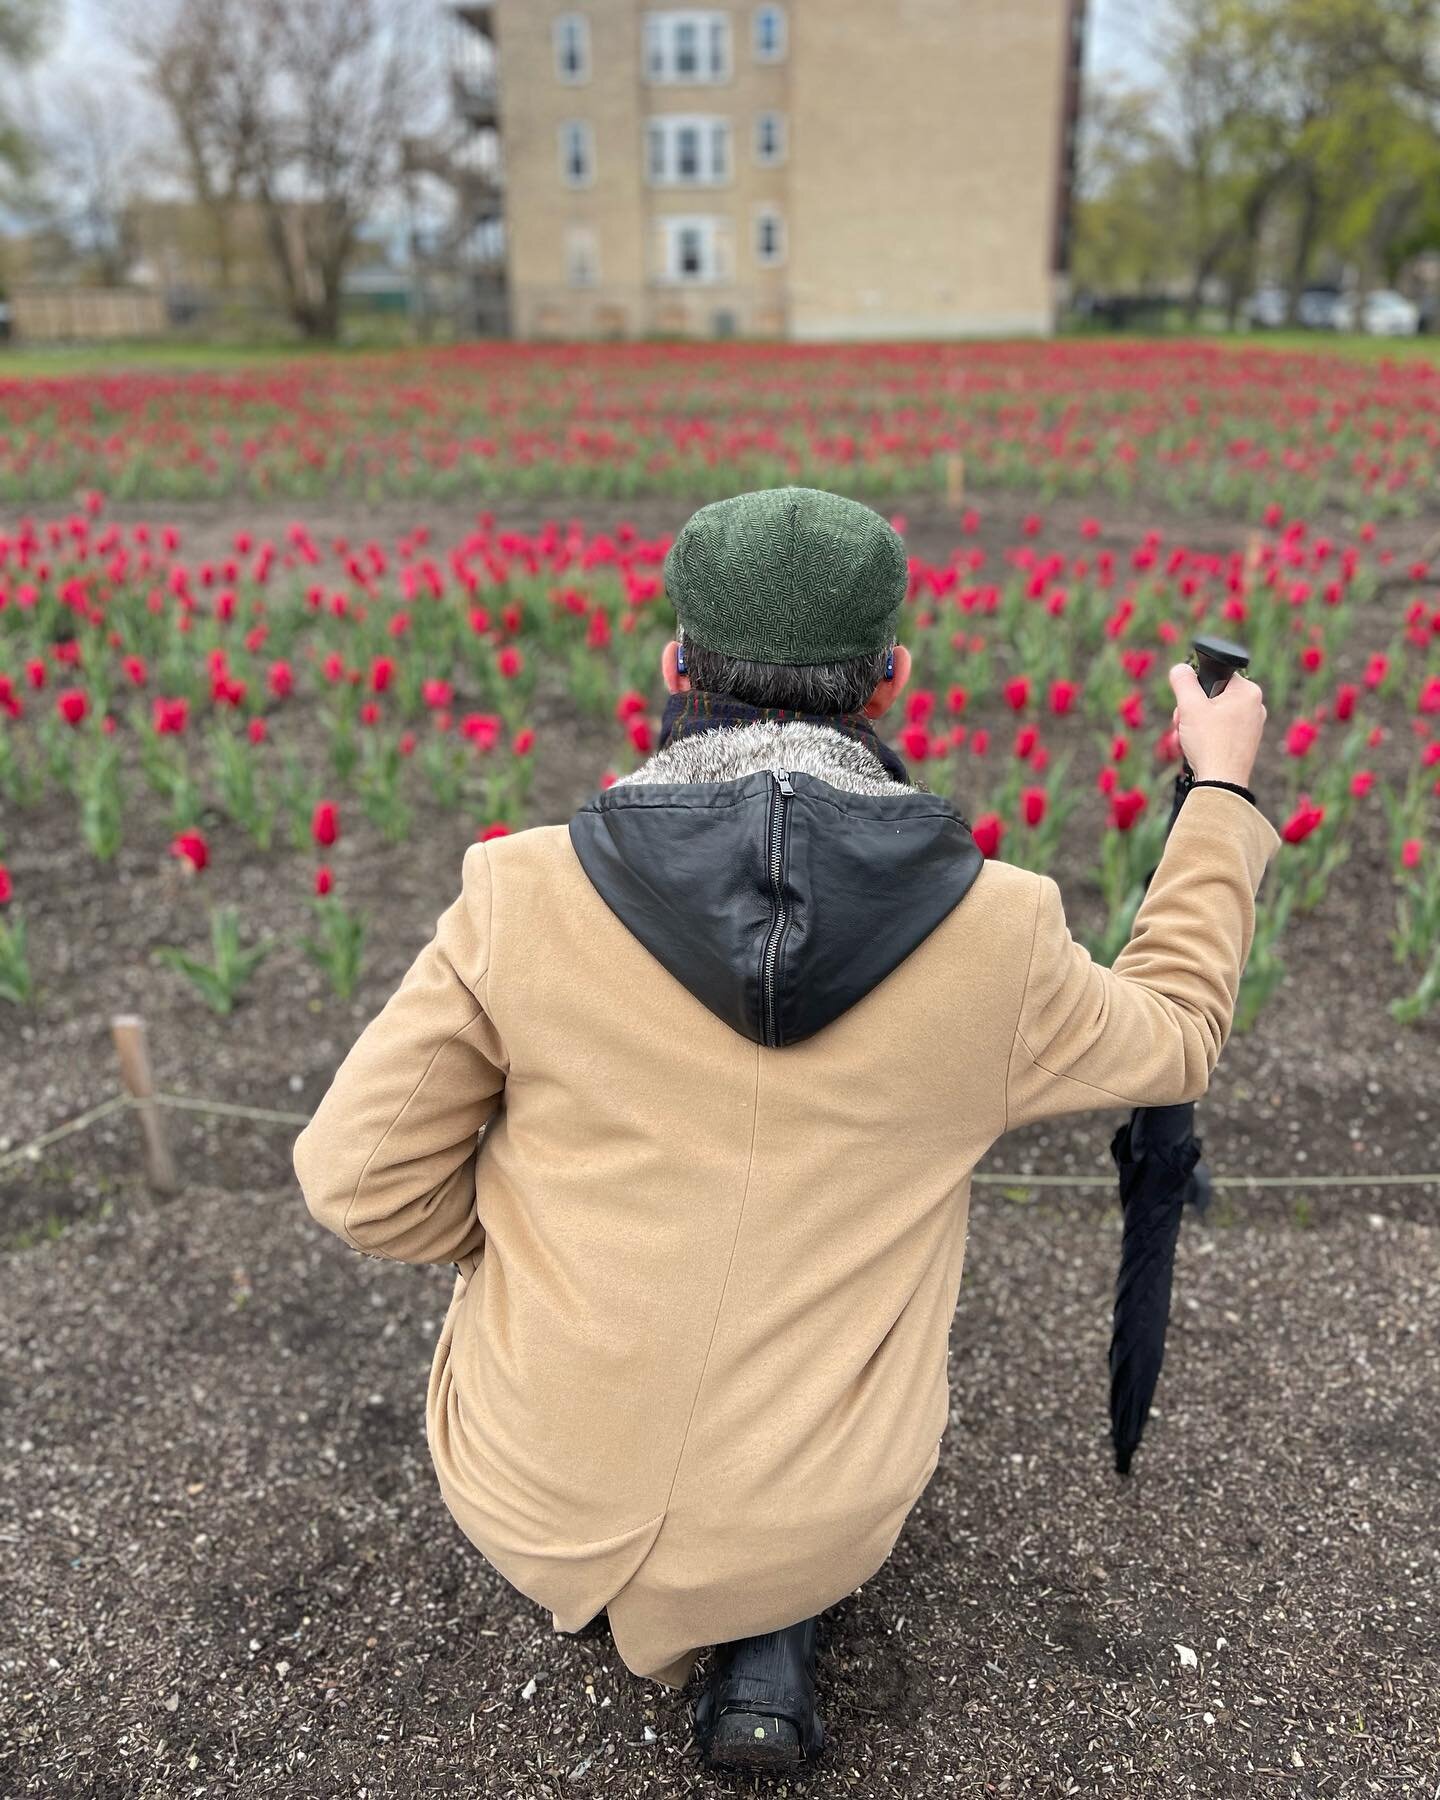 Artist Amanda Williams transformed several vacant lots on the South Side of Chicago where houses once stood  into fields and fields of red tulips.

The result: &ldquo;Redefining Redlining,&rdquo; an artwork intended to highlight the systemic disinves